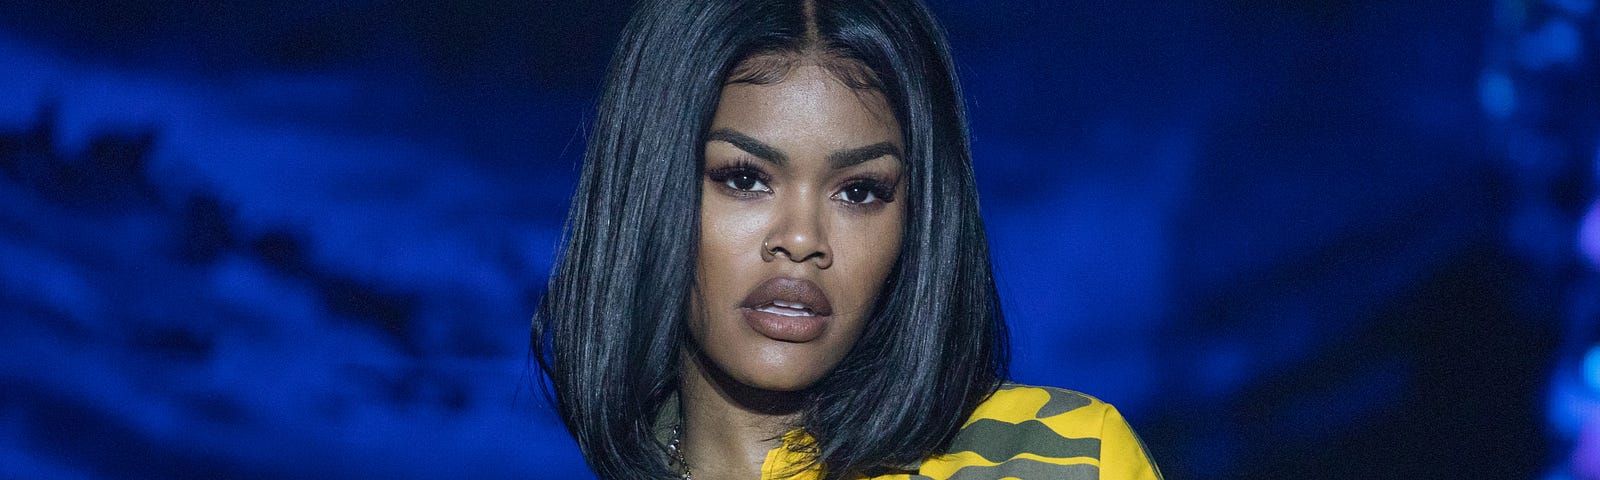 Teyana Taylor at the ‘Keep the Promise’ 2019 World AIDS Day Concert presented by the AIDS Healthcare Foundation.